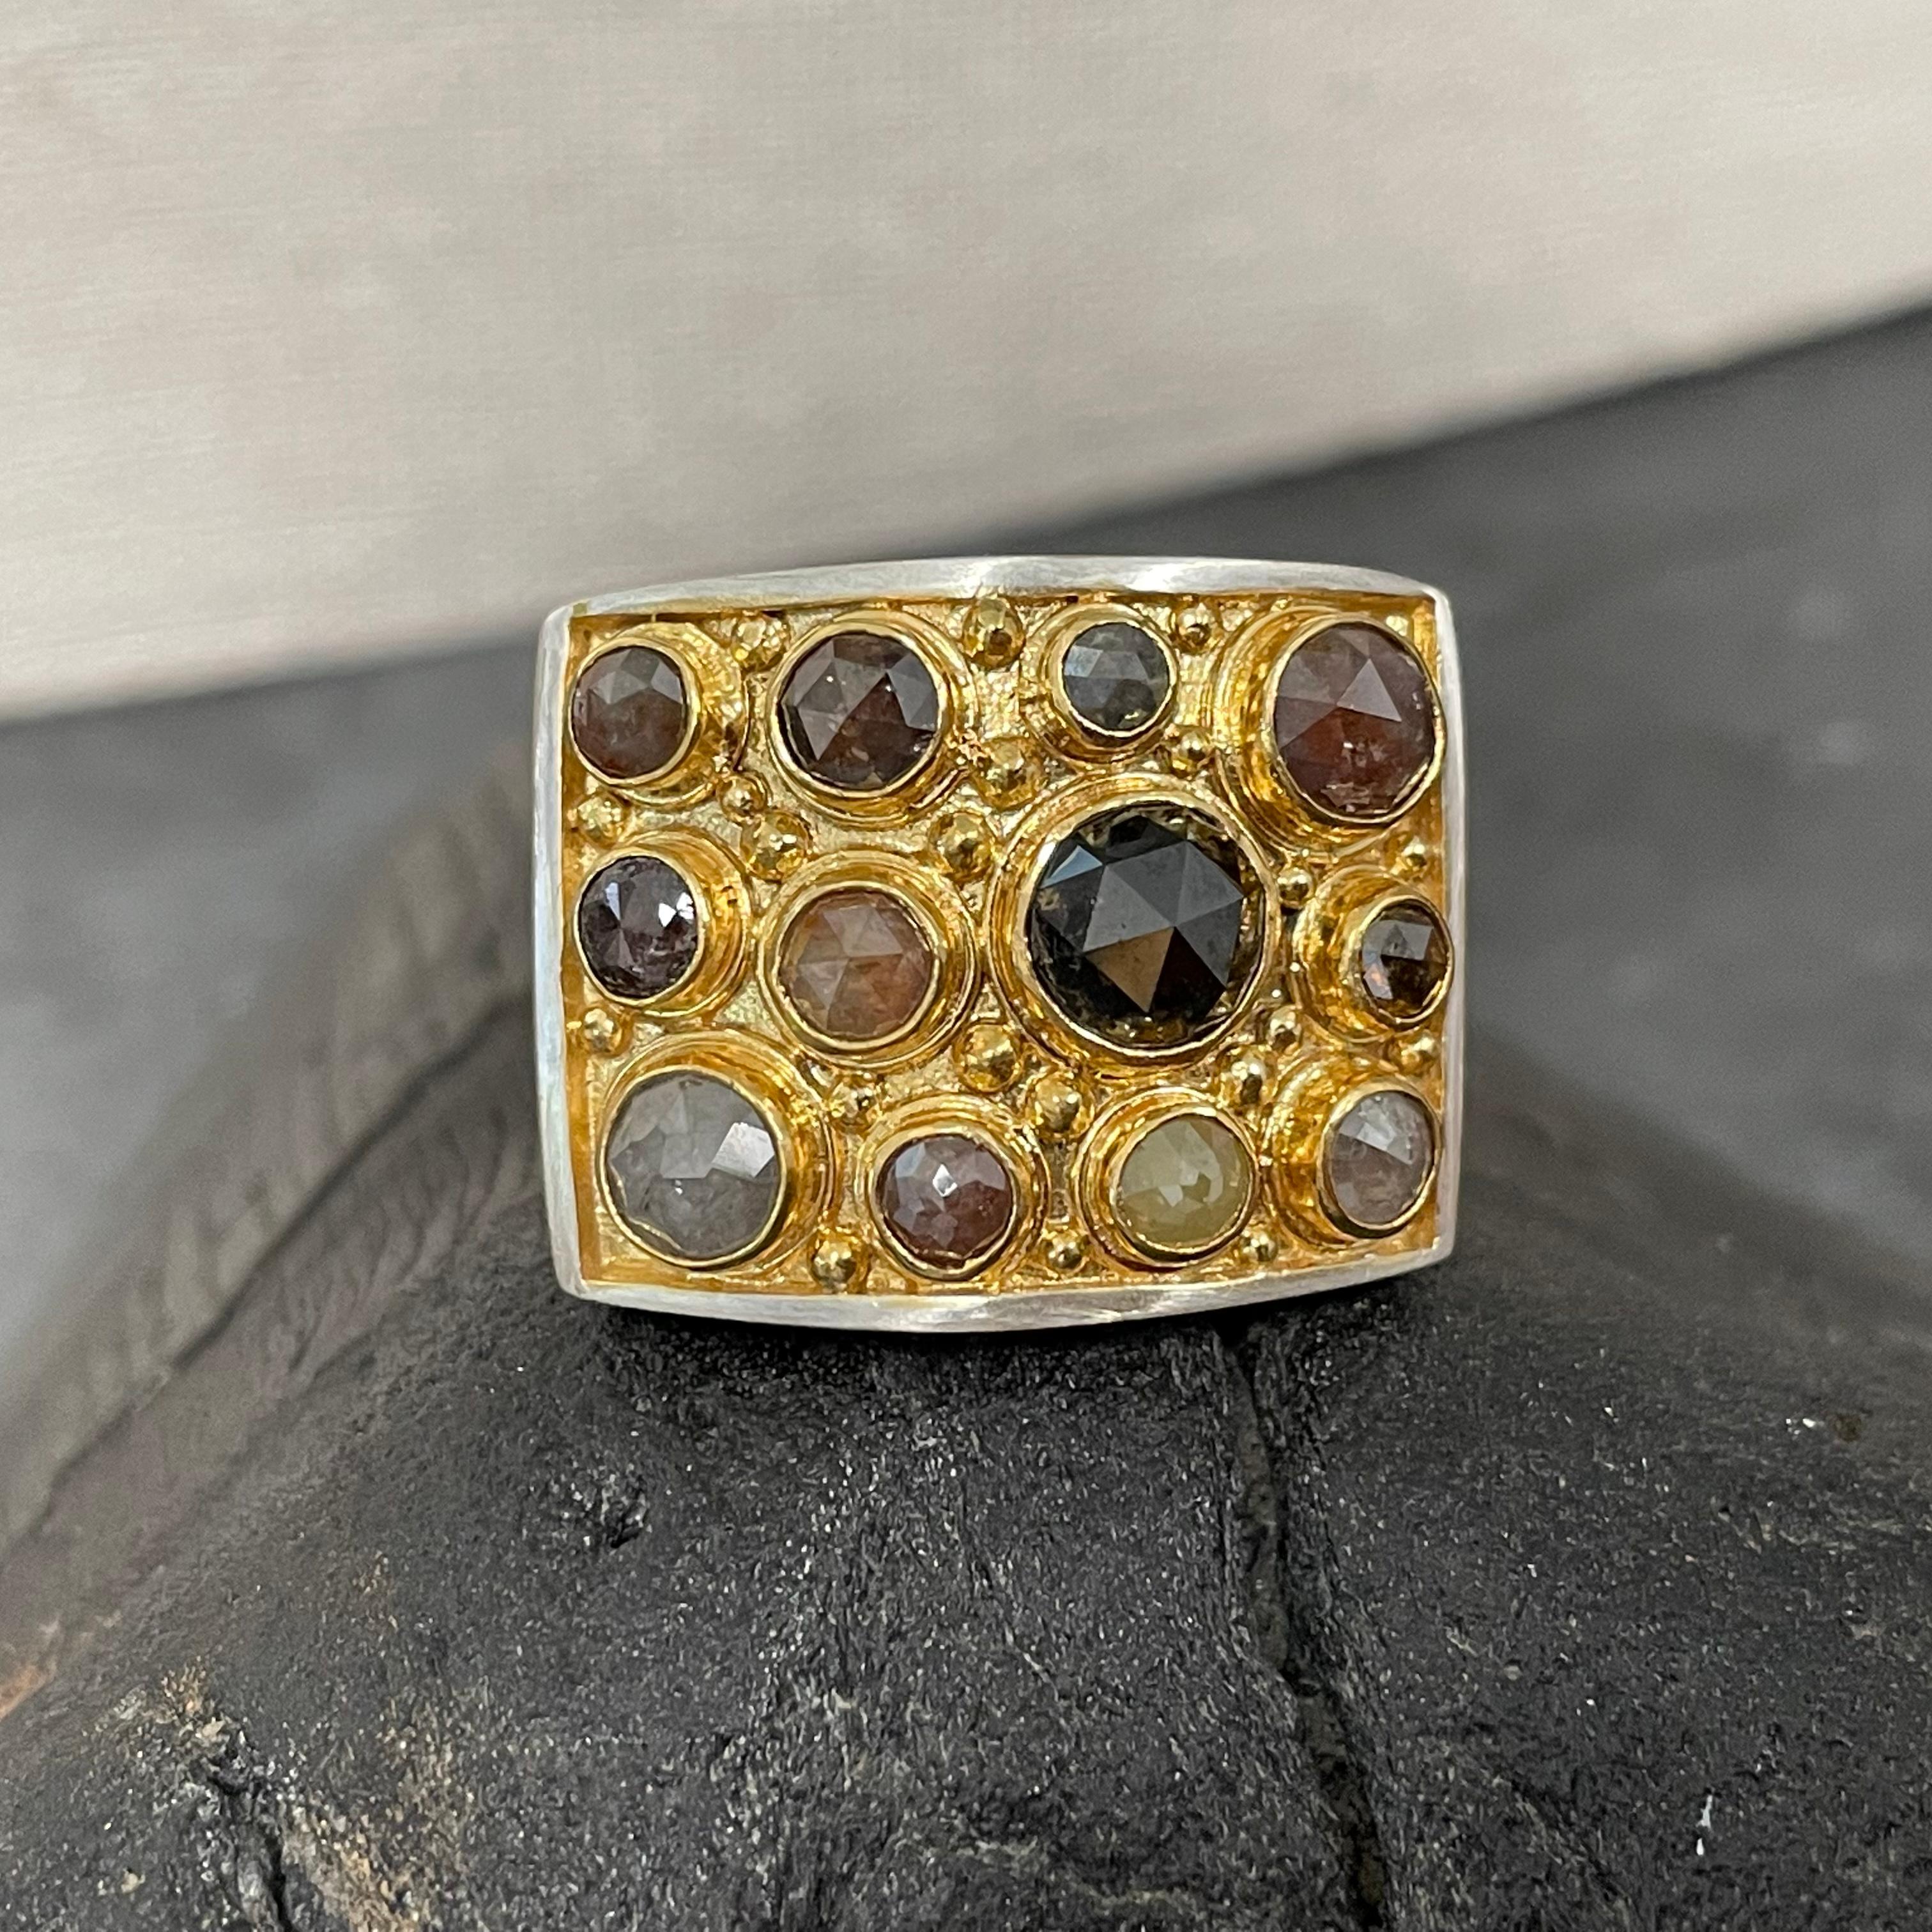 Twelve round rose-cut naturally colored diamonds of varying hues and sizes are set in bezels surrounded by double bezels and granulation interspersed atop a wide 